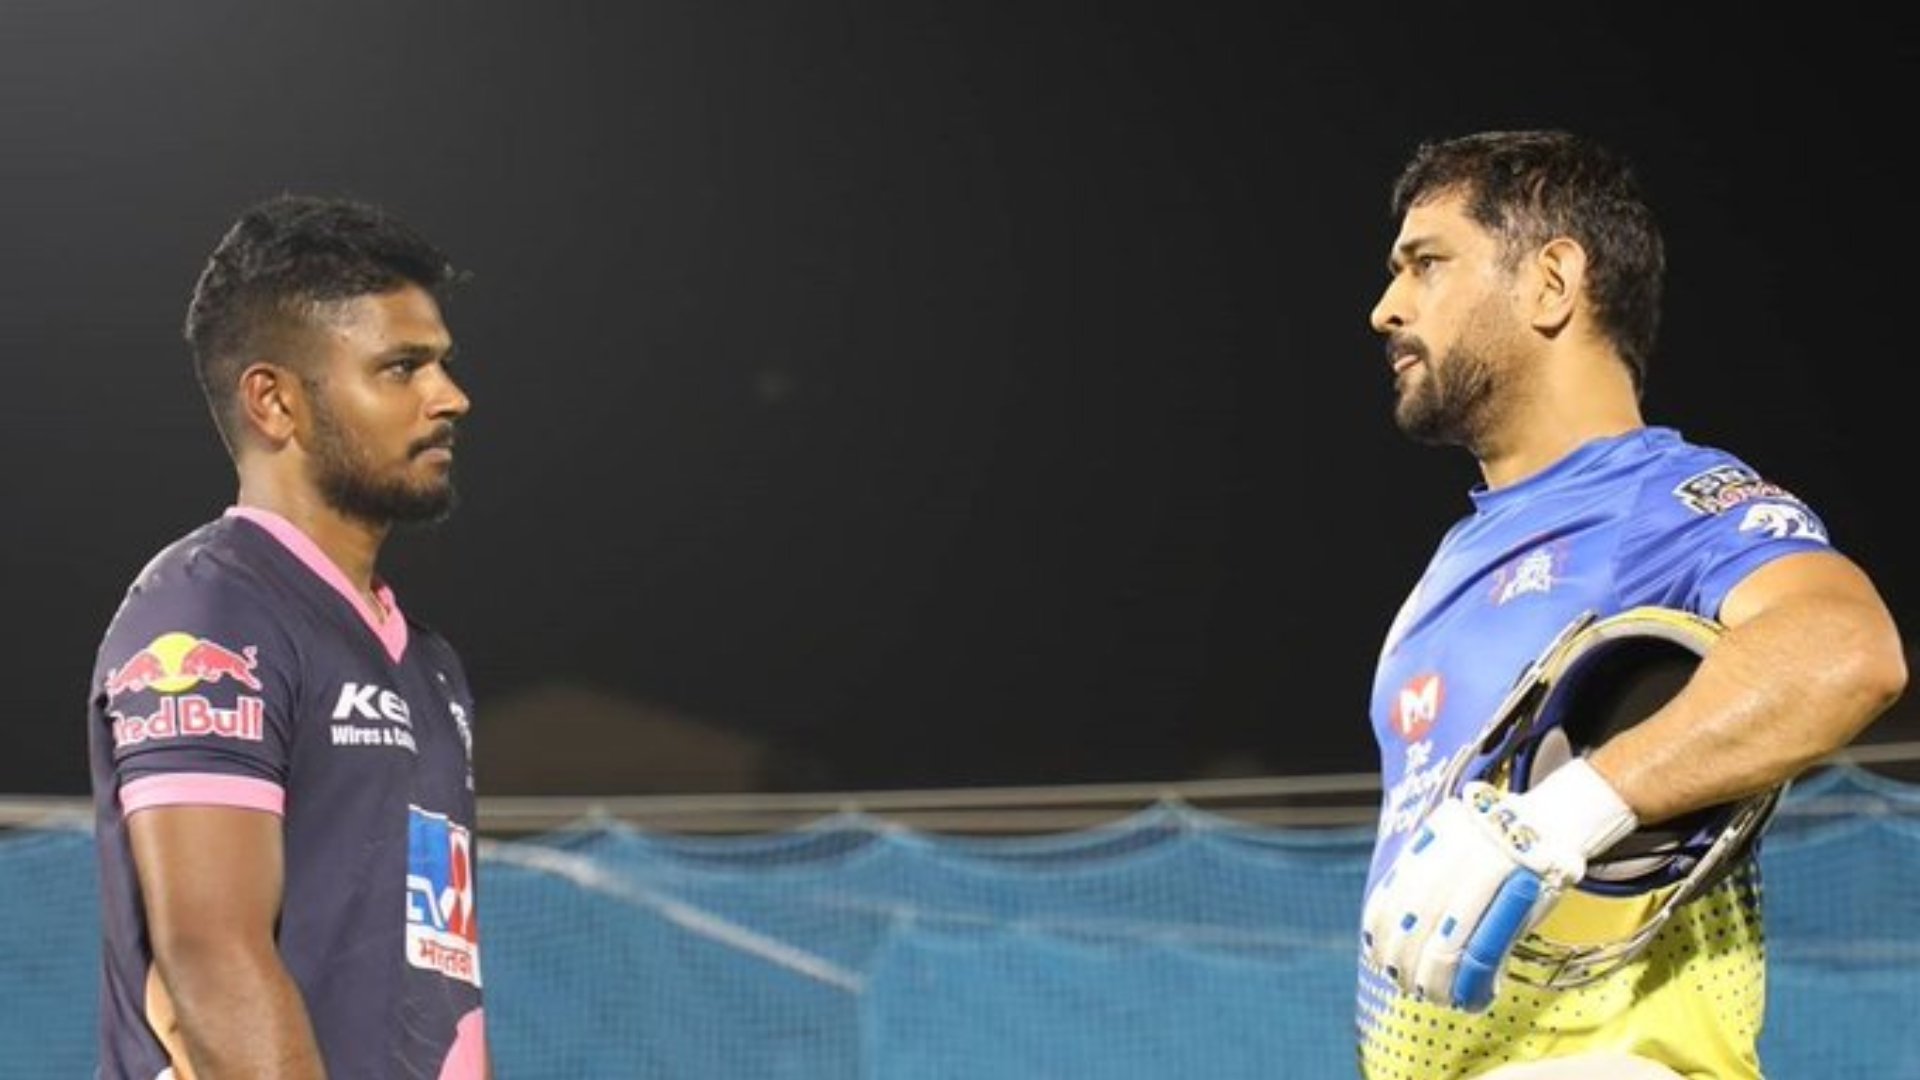 MS Dhoni will be looking to ensure he gets the better of Sanju Samson in the IPL 2021 clash between Chennai Super Kings and Rajasthan Royals.